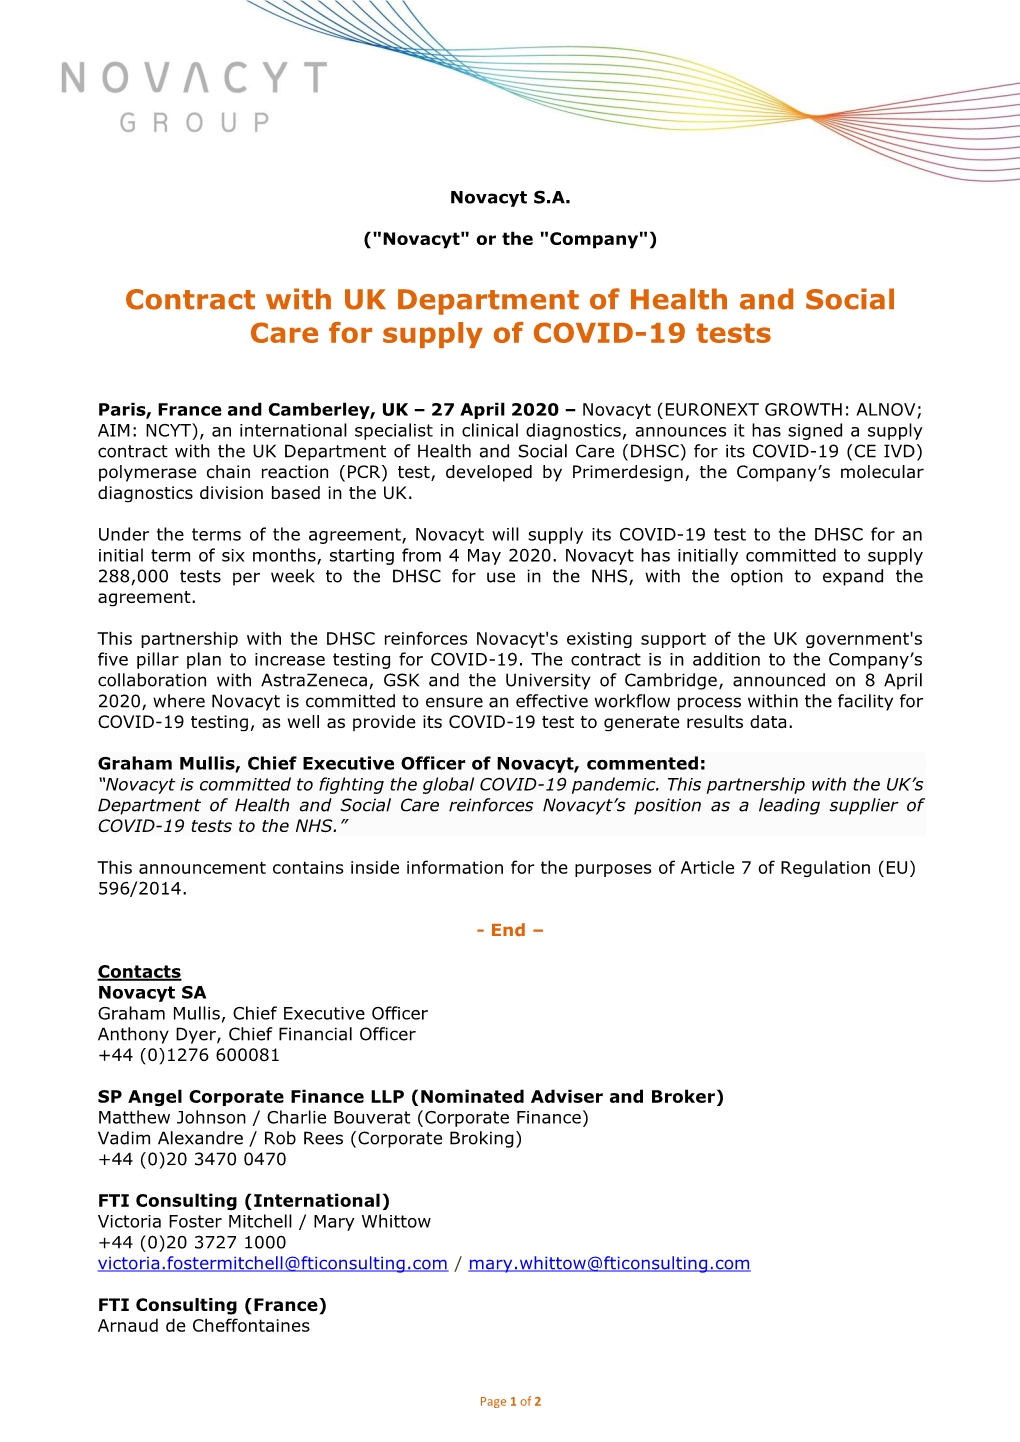 Contract with UK Department of Health and Social Care for Supply of COVID-19 Tests